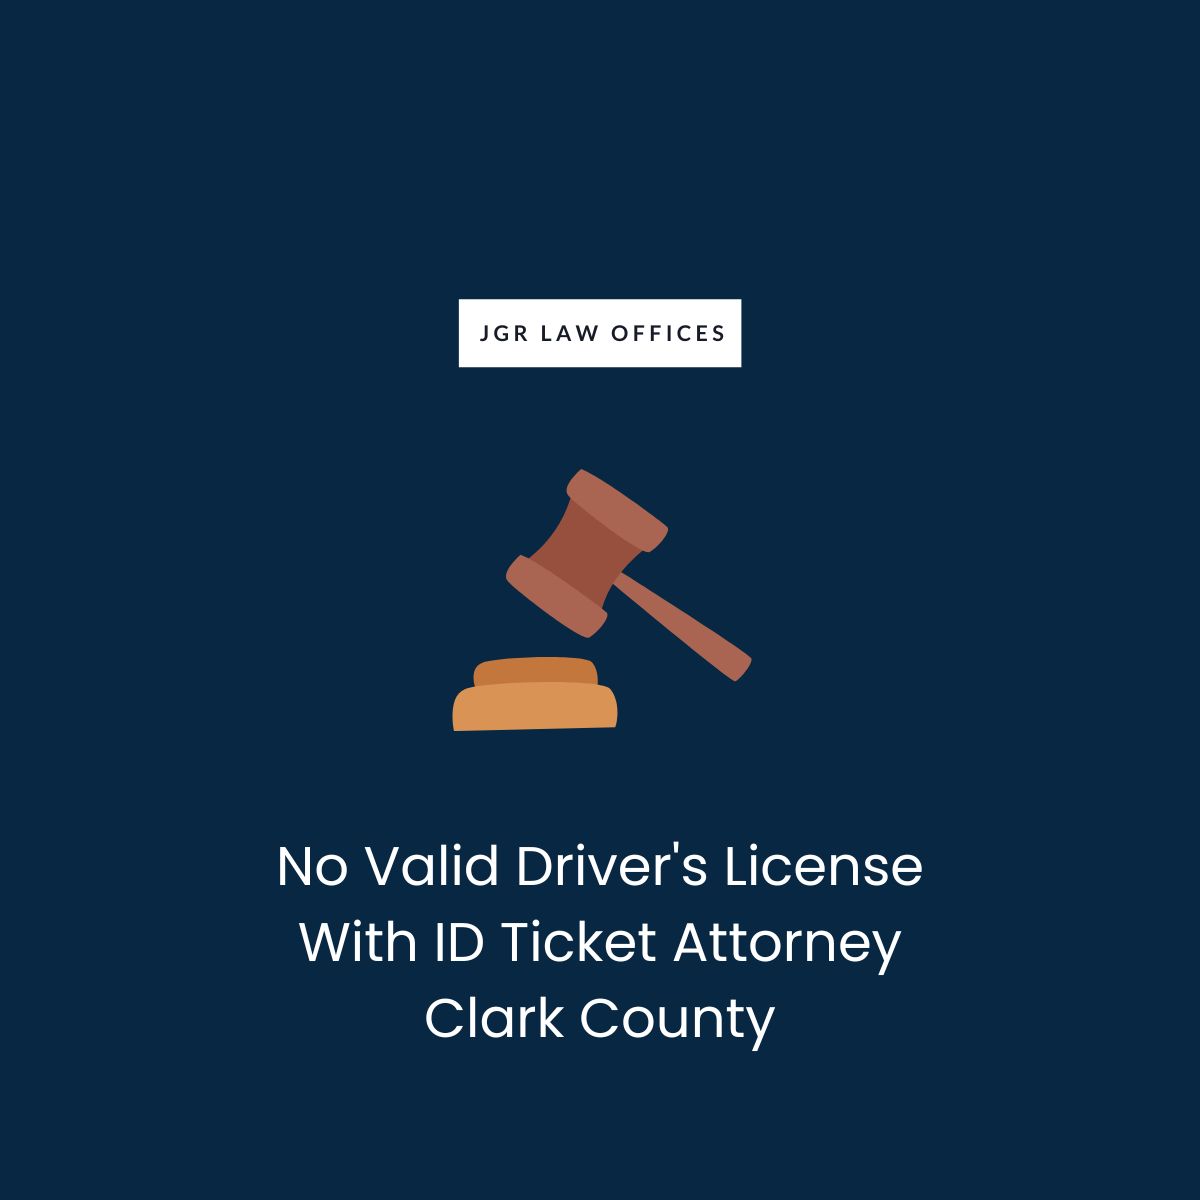 No Valid Driver's License With ID Ticket Attorney Clark County